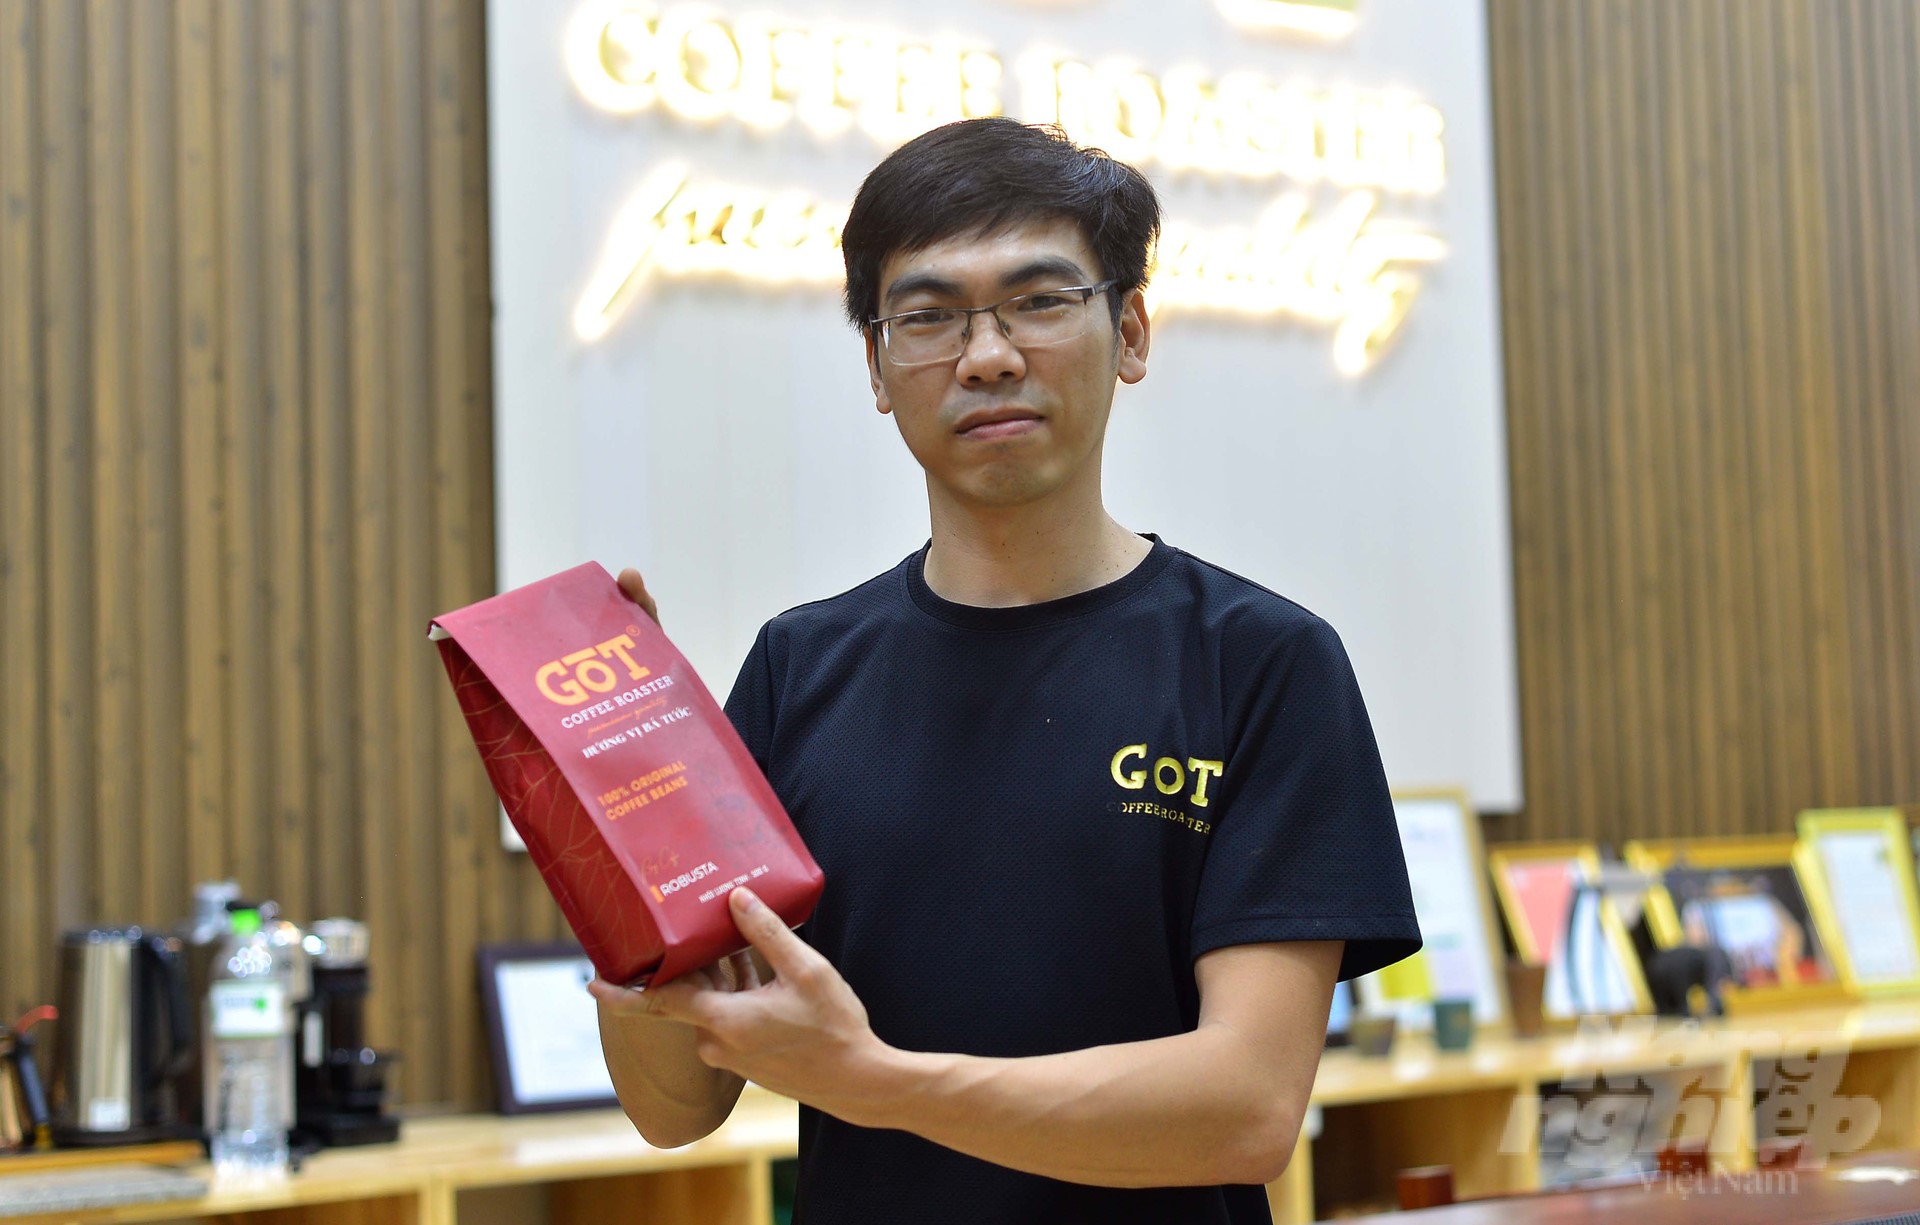 Nguyen Phuc Nong Co., Ltd. (a coffee production unit with the Got Coffee brand, located in Loc Thanh commune, Bao Lam district, Lam Dong) builds an organic coffee area and implements a modern processing process to ensure product quality. Photo: Minh Hau.